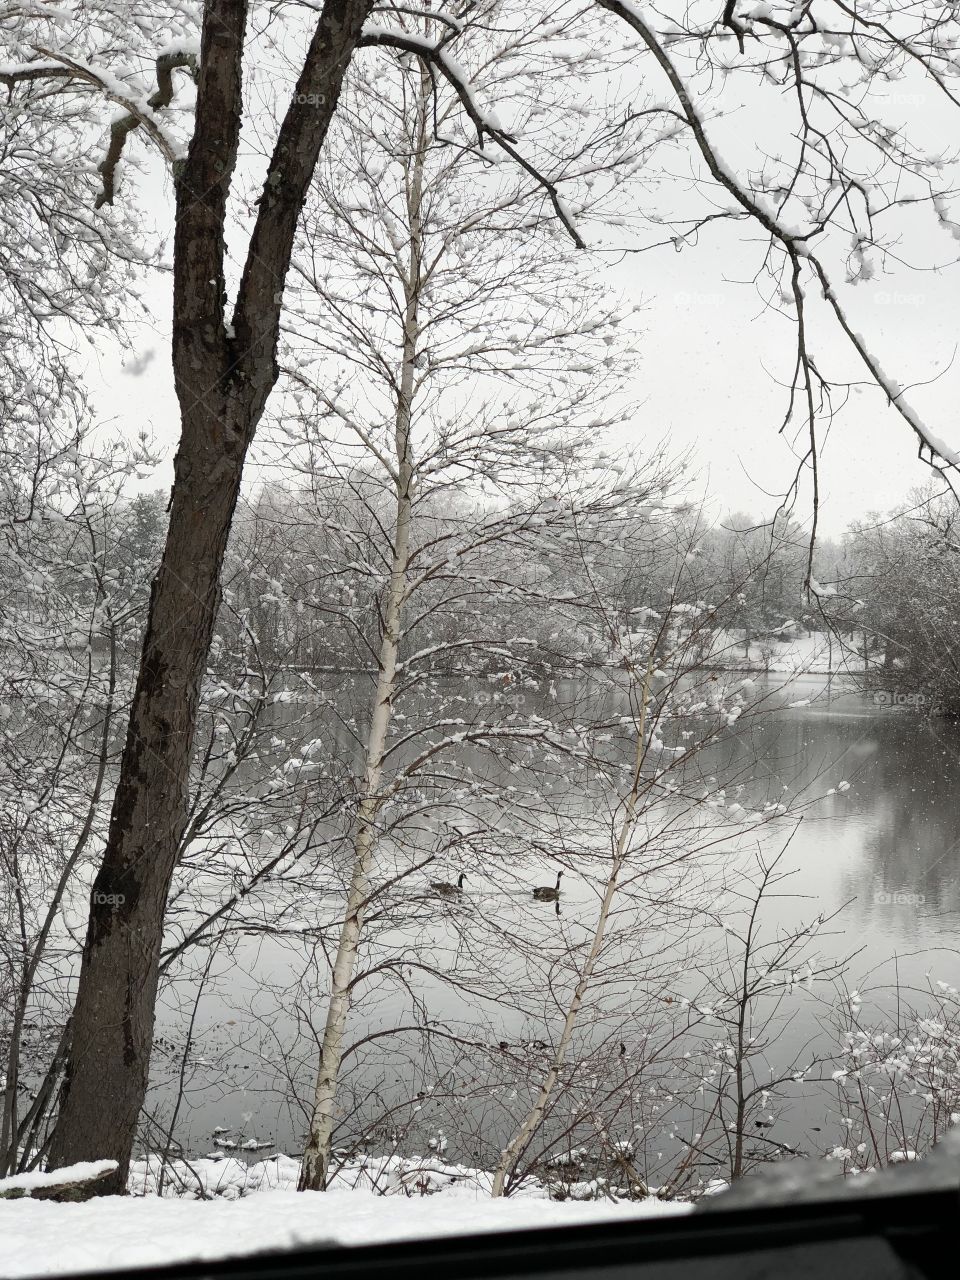 Ducks swim leisurely across the river as snowflakes gain momentum in this magical Winter Wonderland in Roger Williams Park in Rhode Island, during surprise Spring snowstorm (April 2018.) A thick layer of mist and fog created poor visibility.